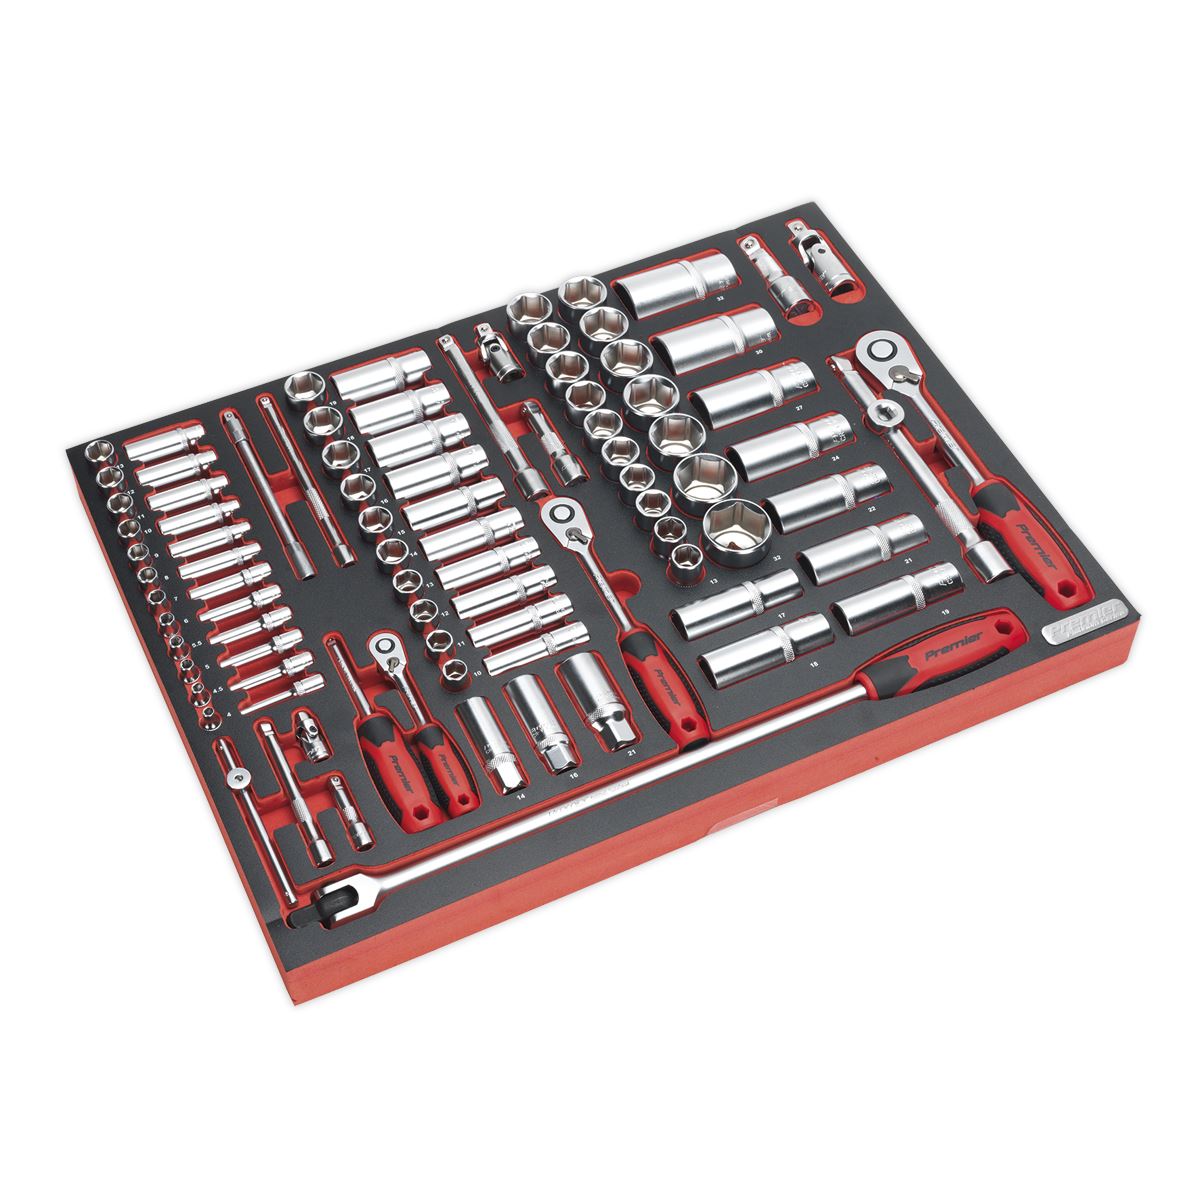 Sealey Premier Tool Tray with Socket Set 91pc 1/4", 3/8" & 1/2"Sq Drive